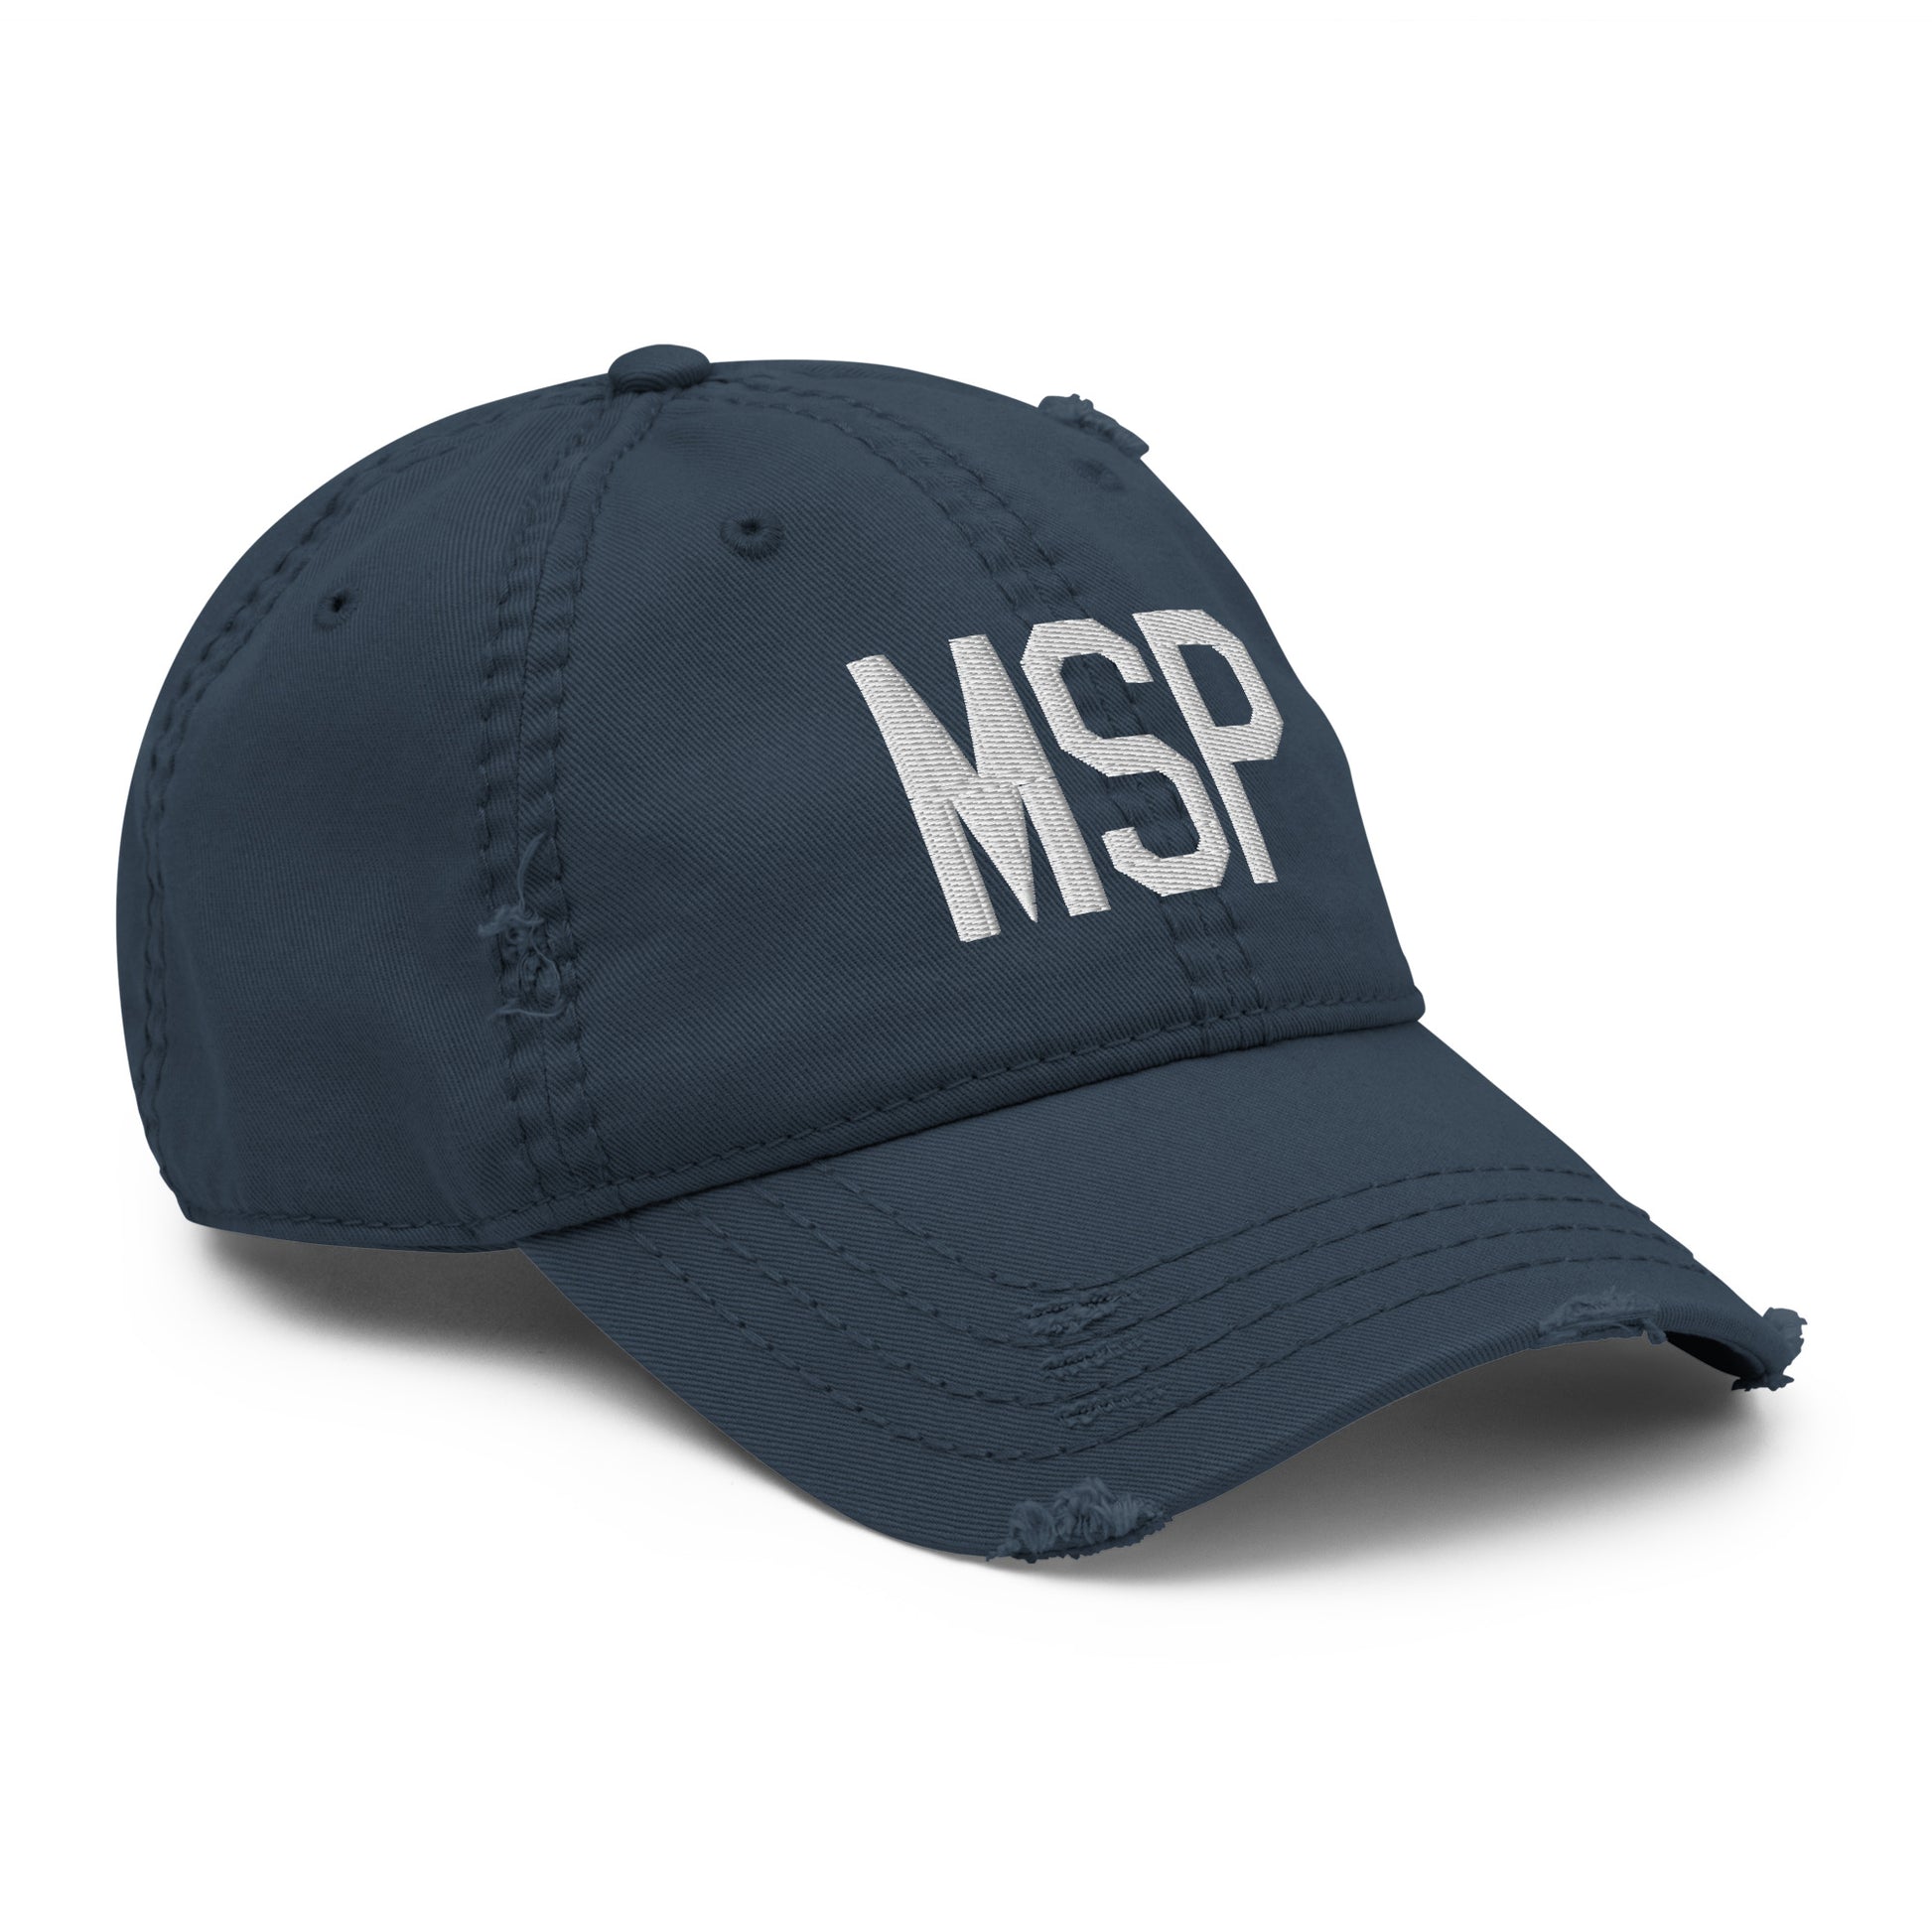 Airport Code Distressed Hat - White • MSP Minneapolis • YHM Designs - Image 14